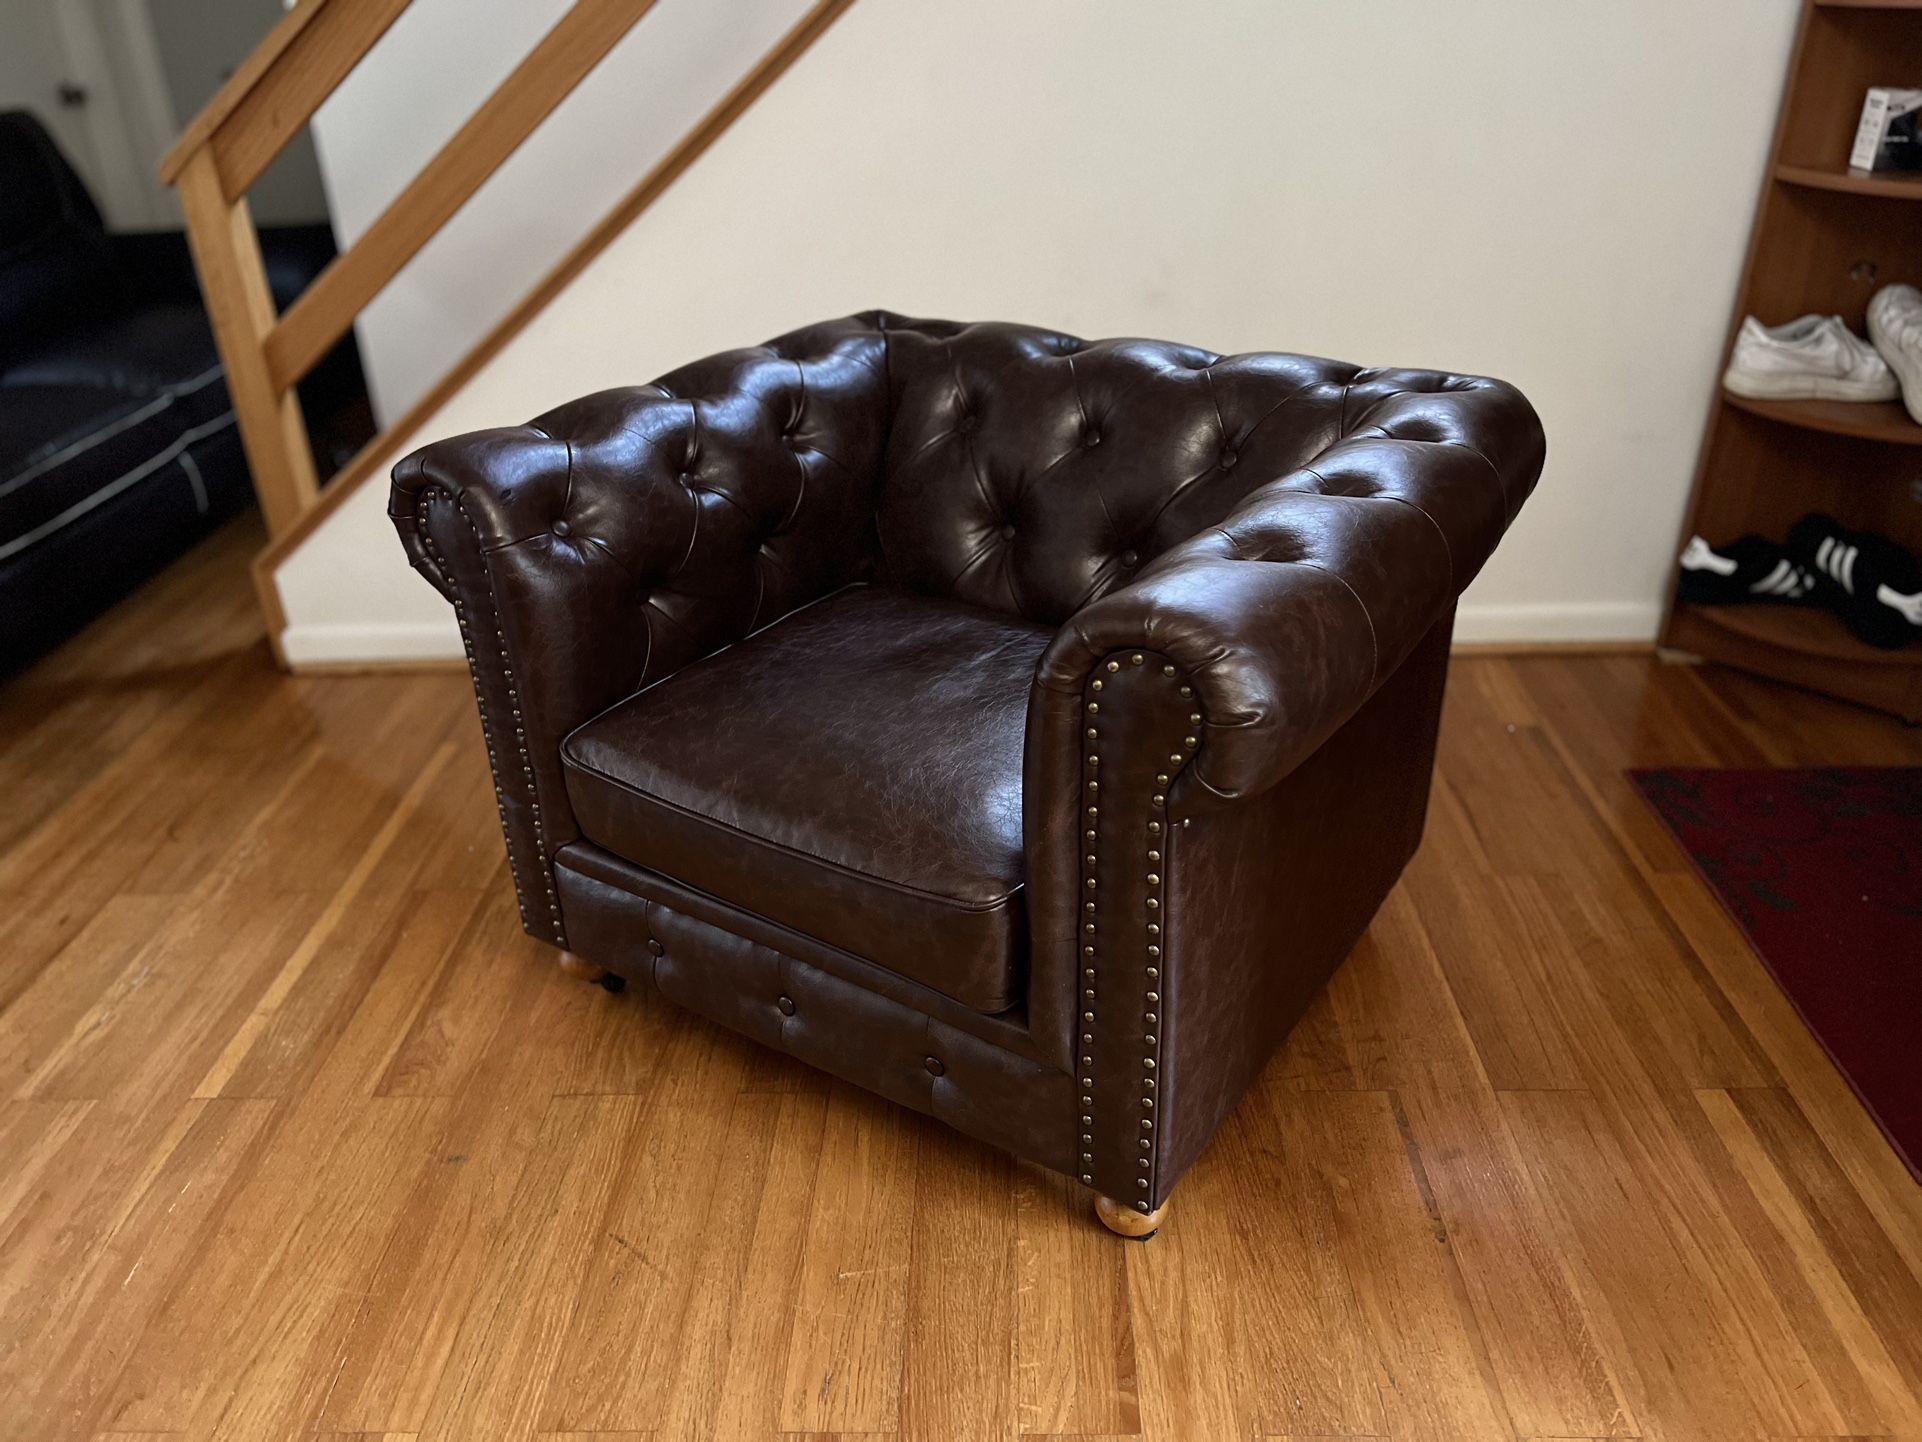 GORGEOUS TUFTED LEATHER CHAIR